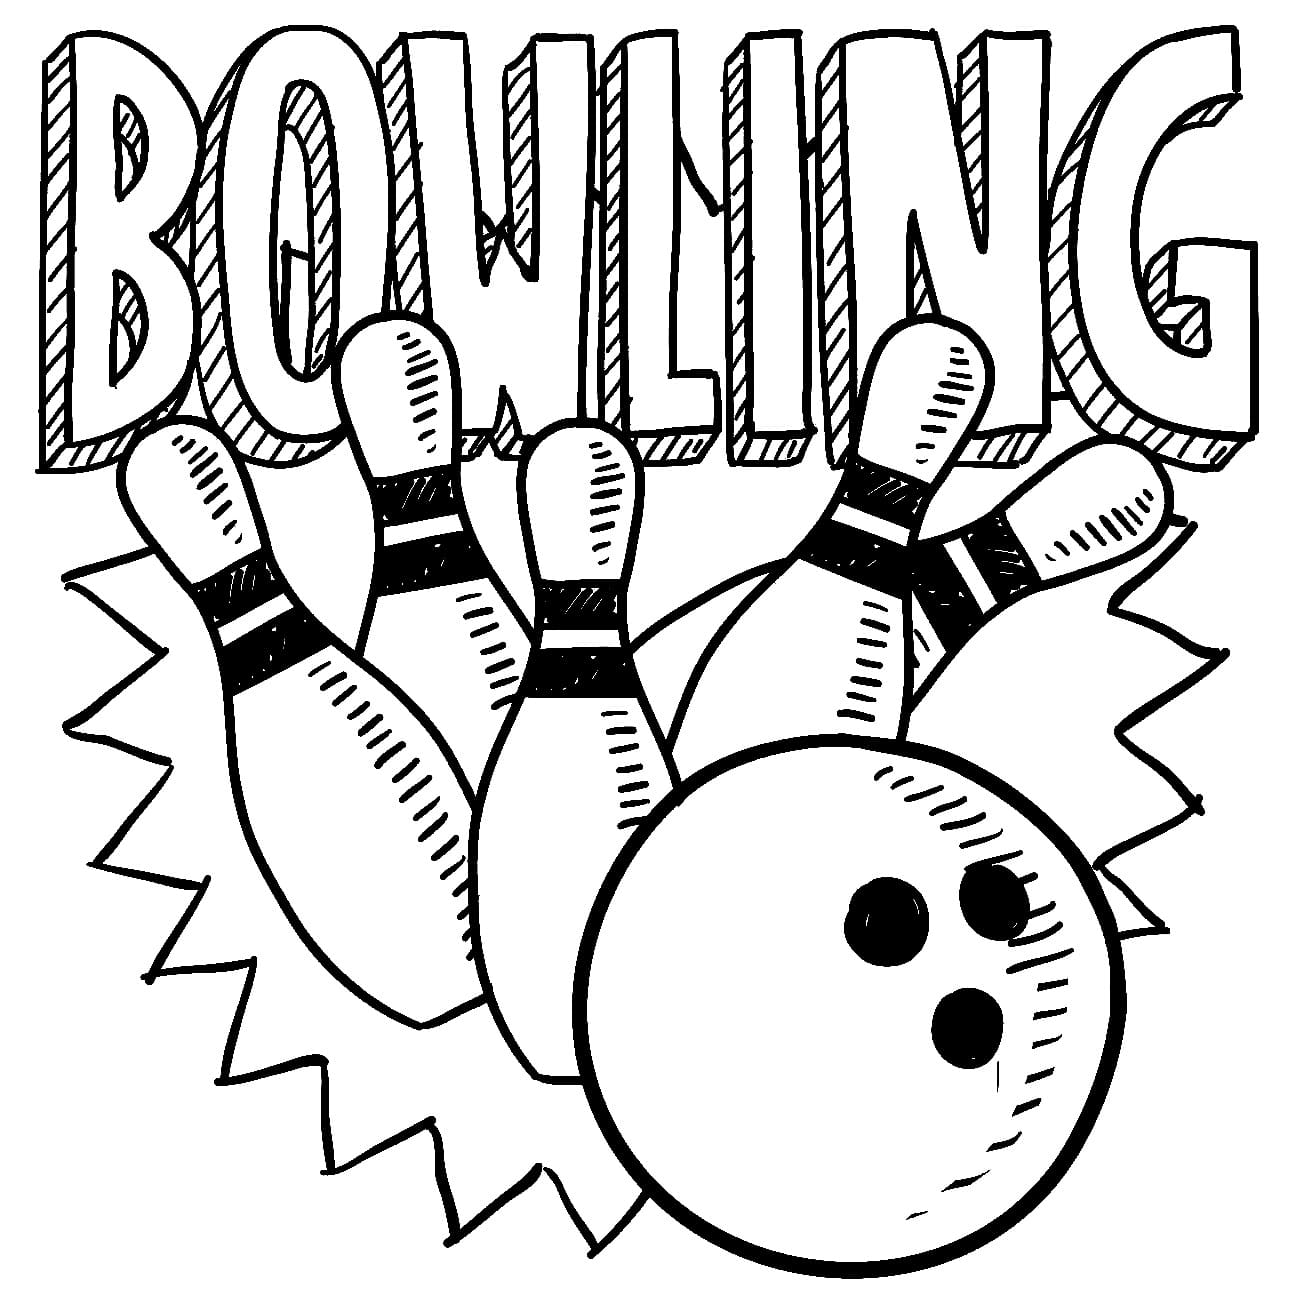 Bowling Image coloring page - Download, Print or Color Online for Free